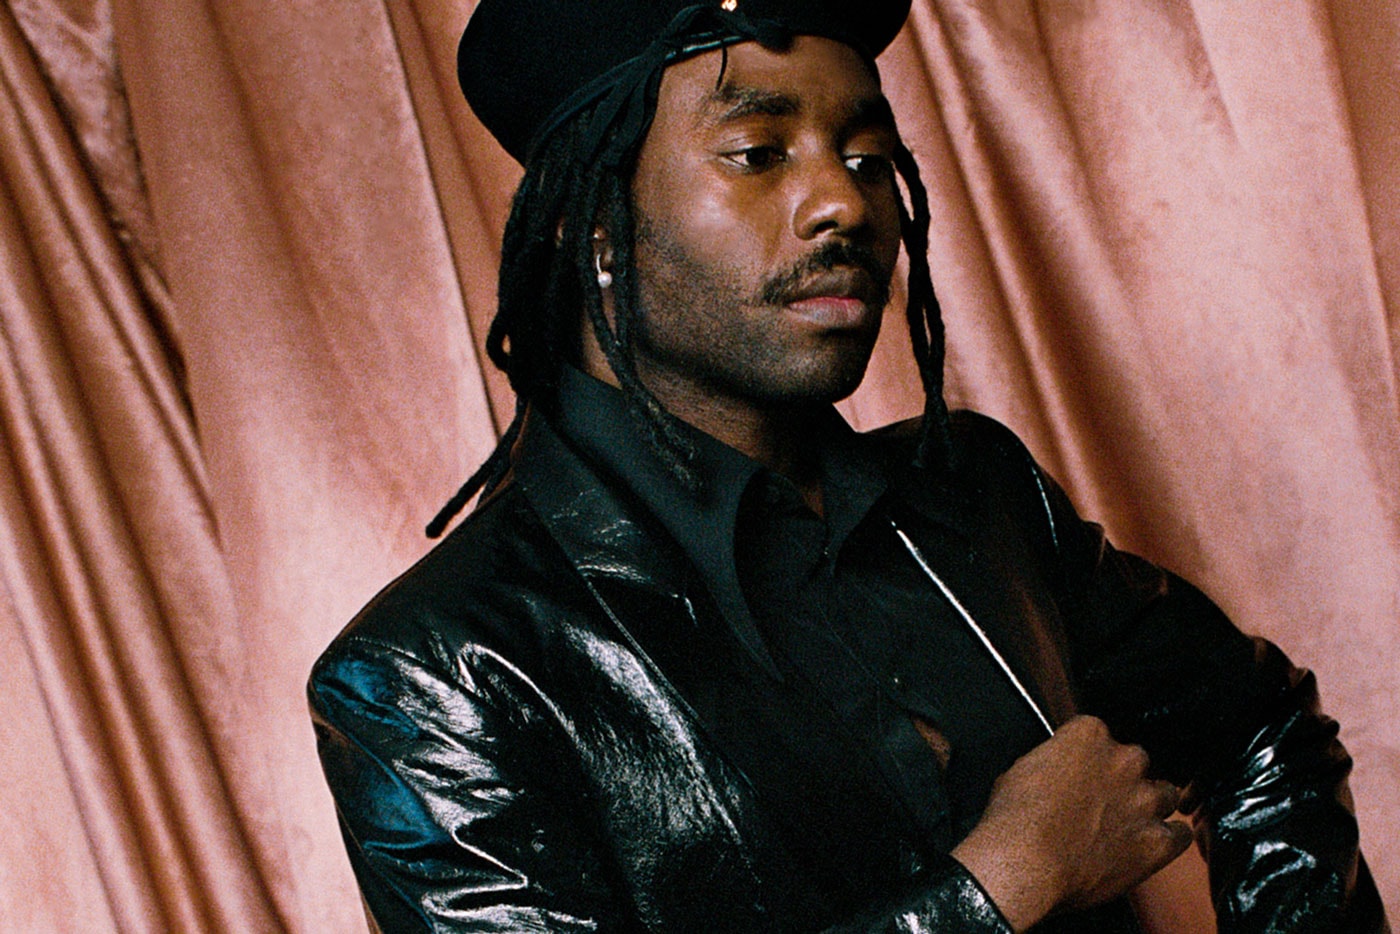 Blood Orange to Release New Music This Week